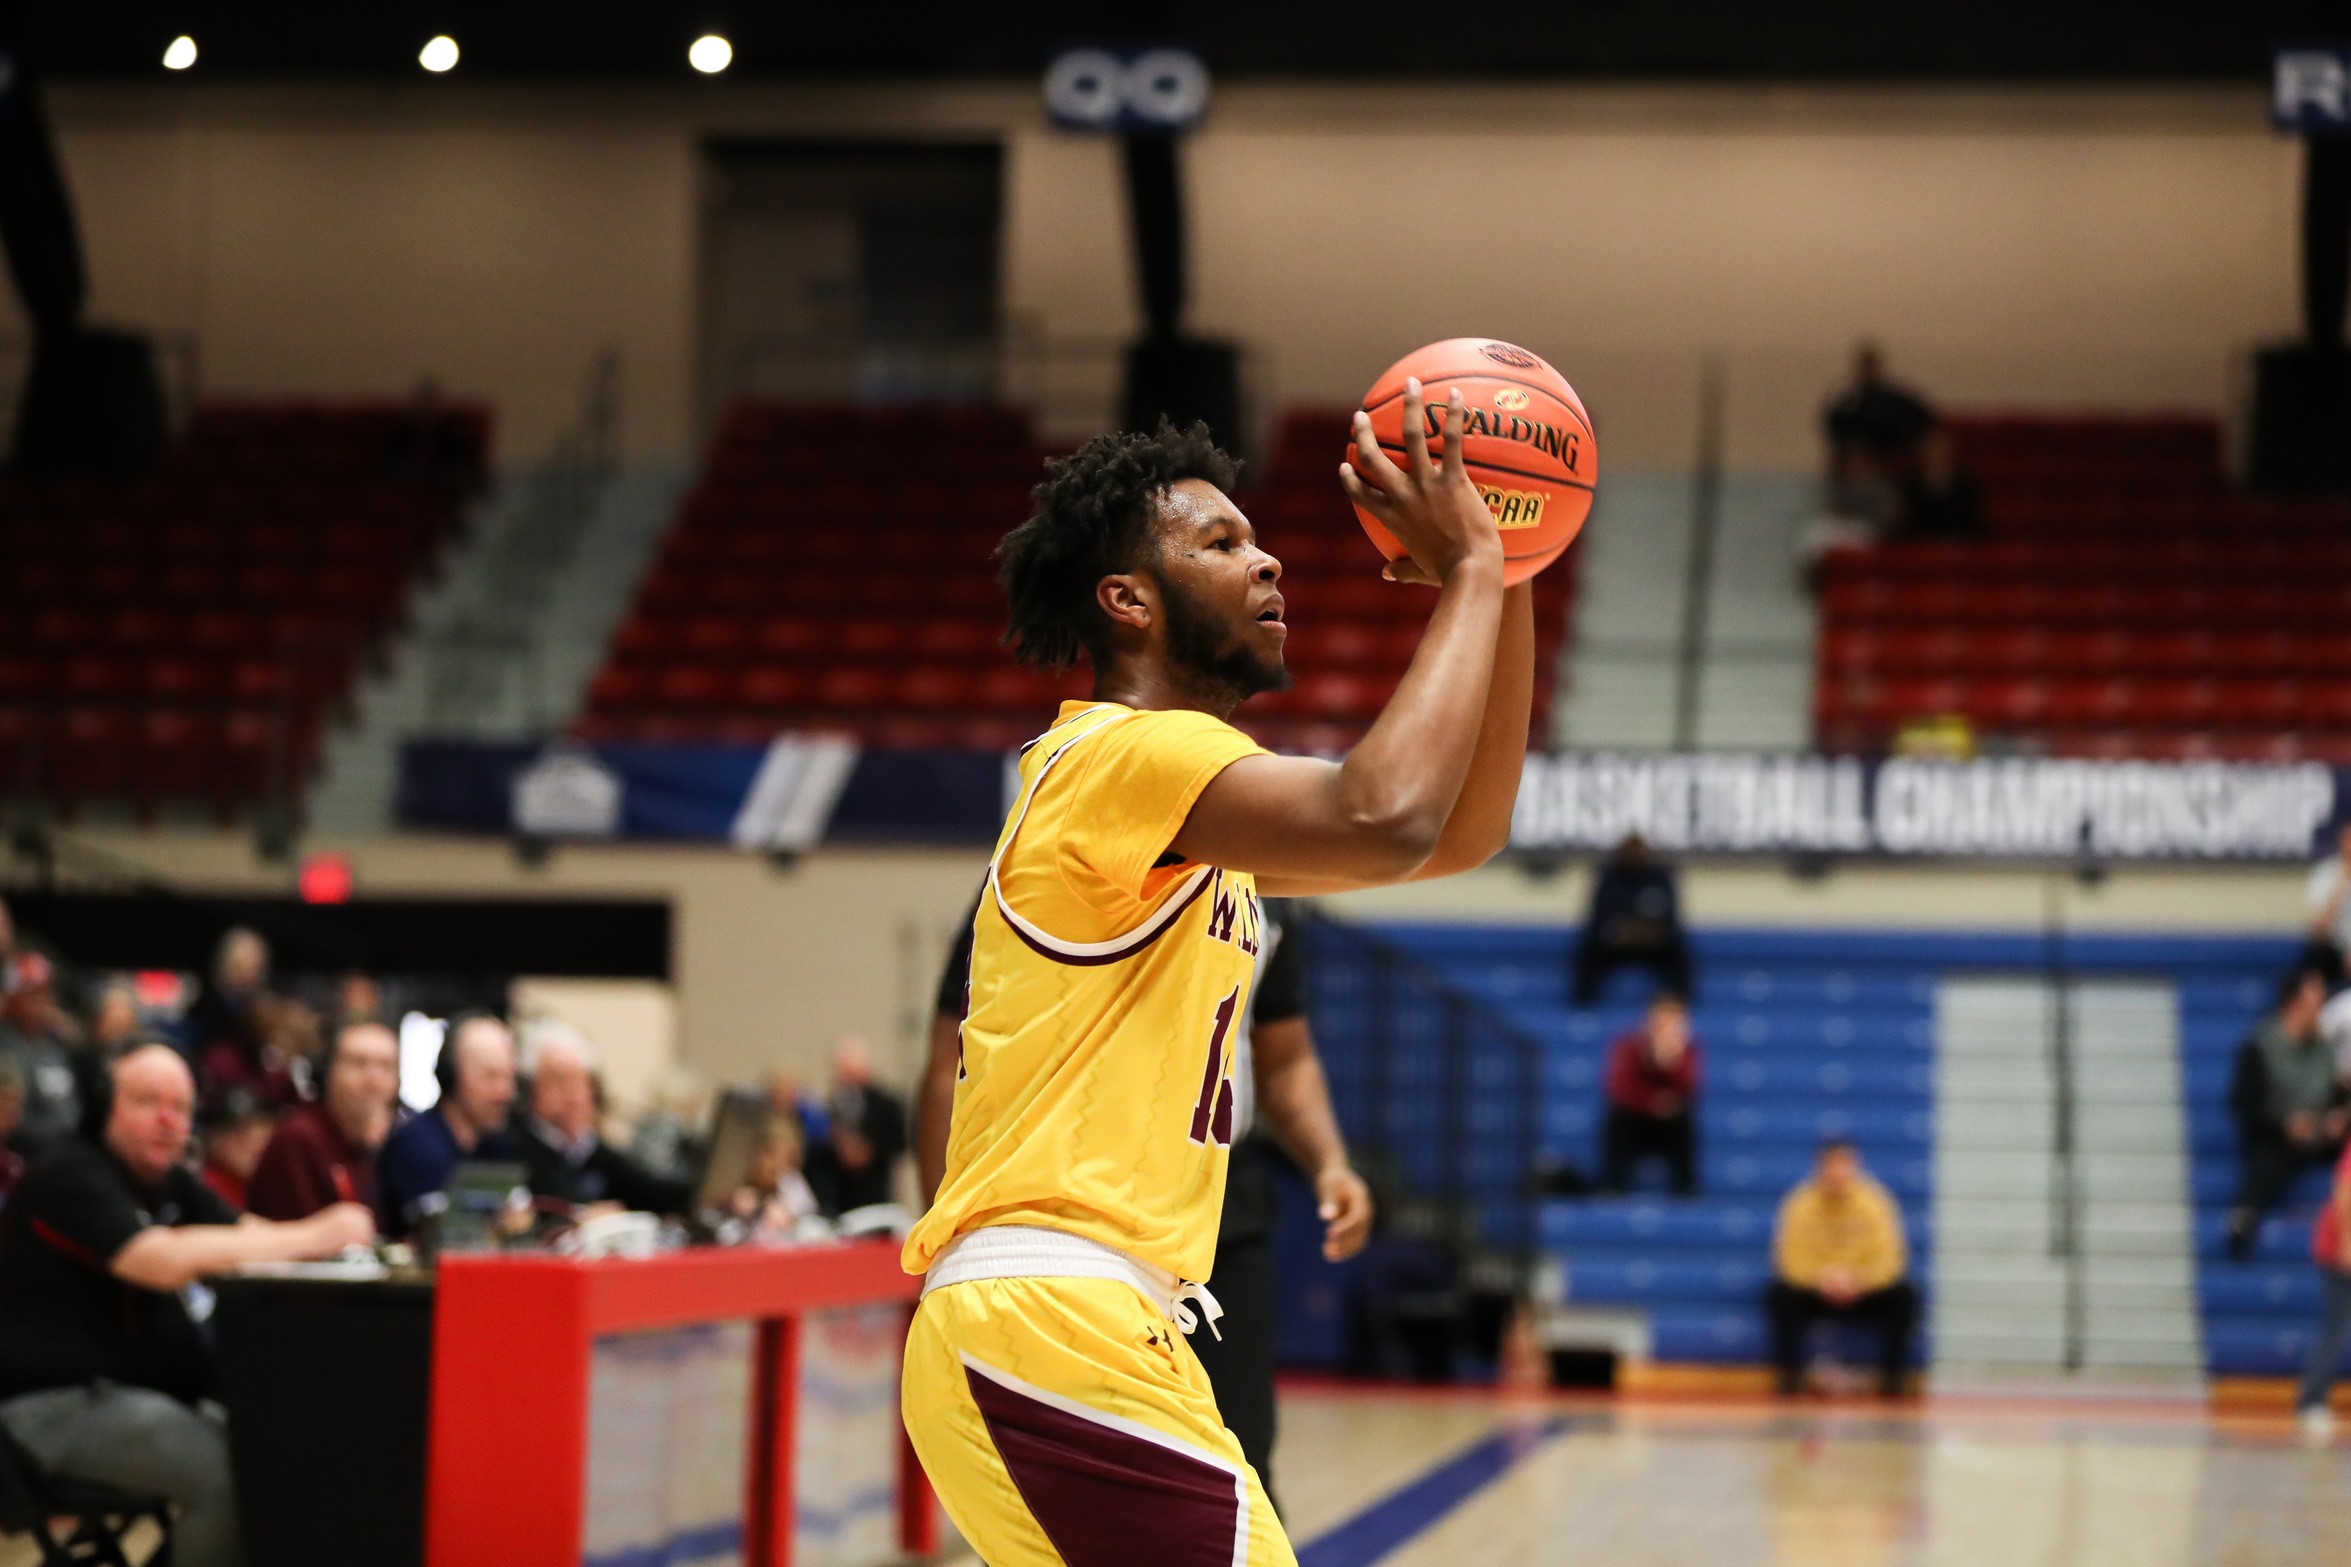 Pearl River's special year comes to end in NJCAA Tournament